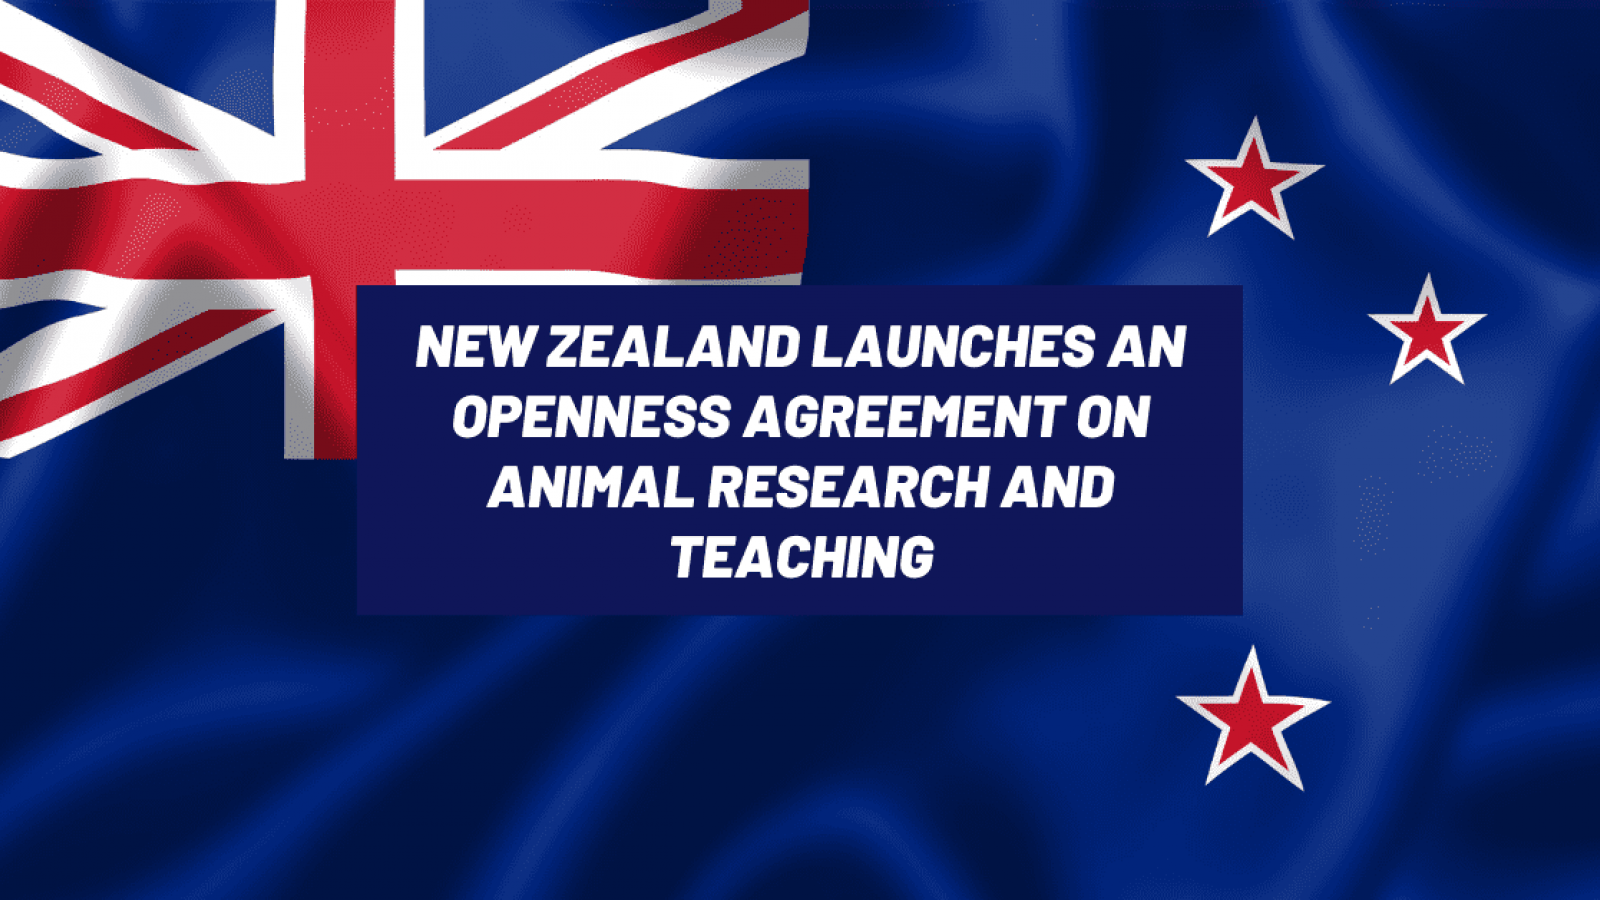 New Zealand launches an Openness Agreement on Animal Research and Teaching